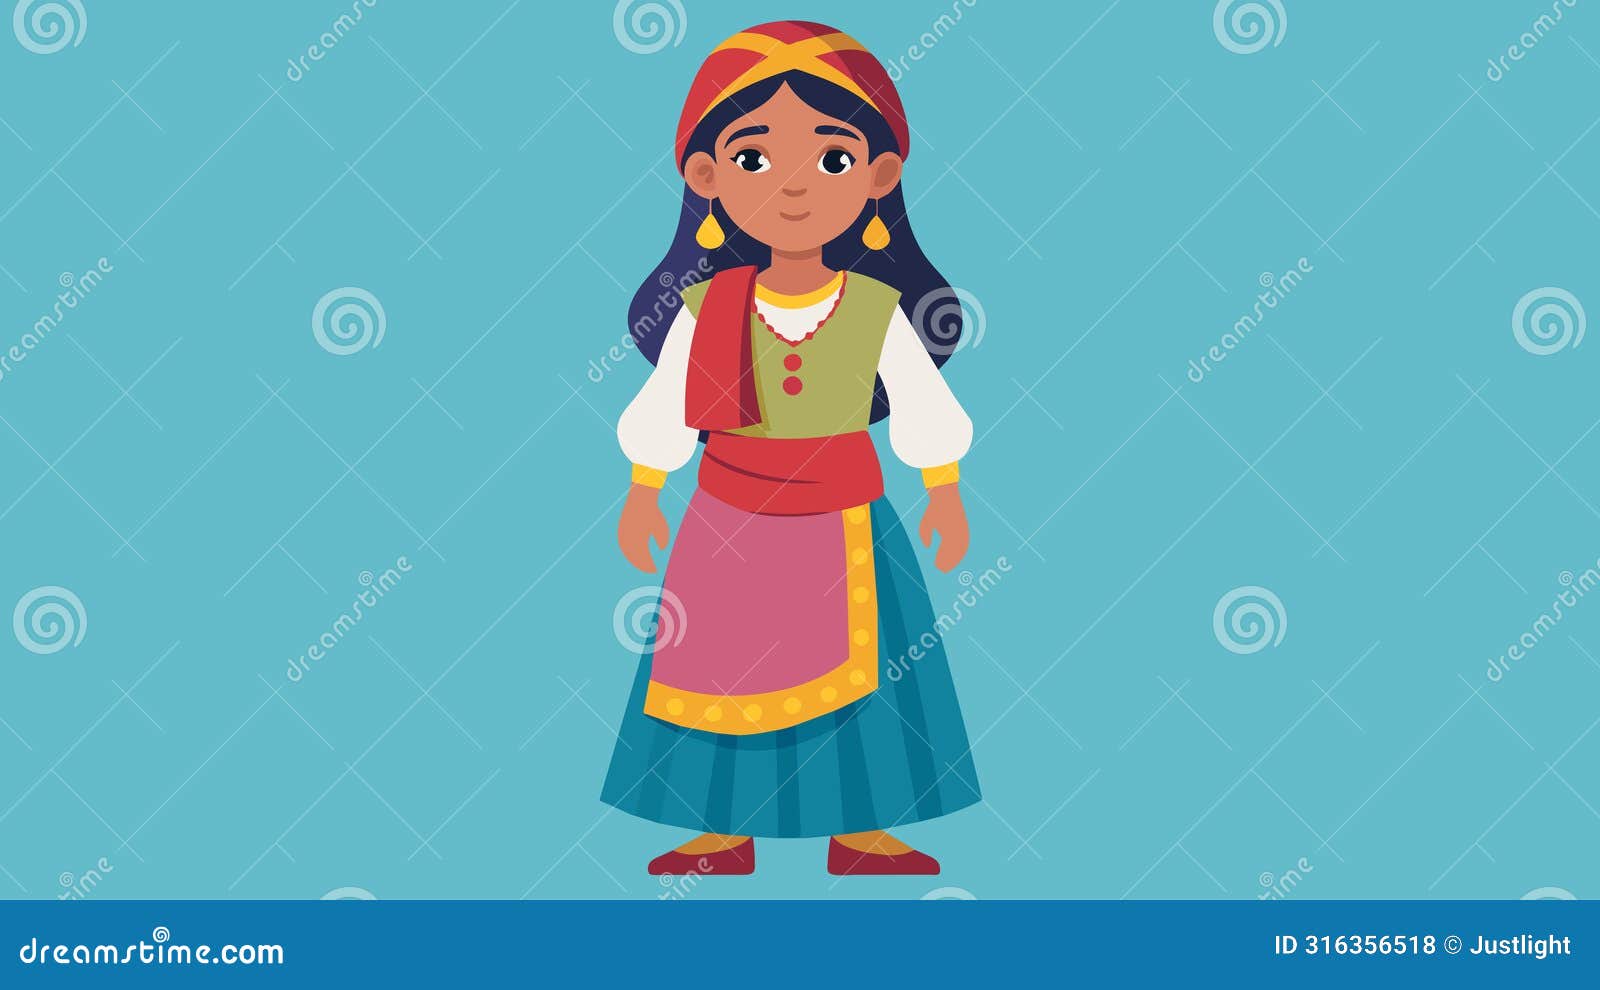 a young girl dressed as a with a colorful skirt headscarf and bangles showcasing the fascination with romani culture in